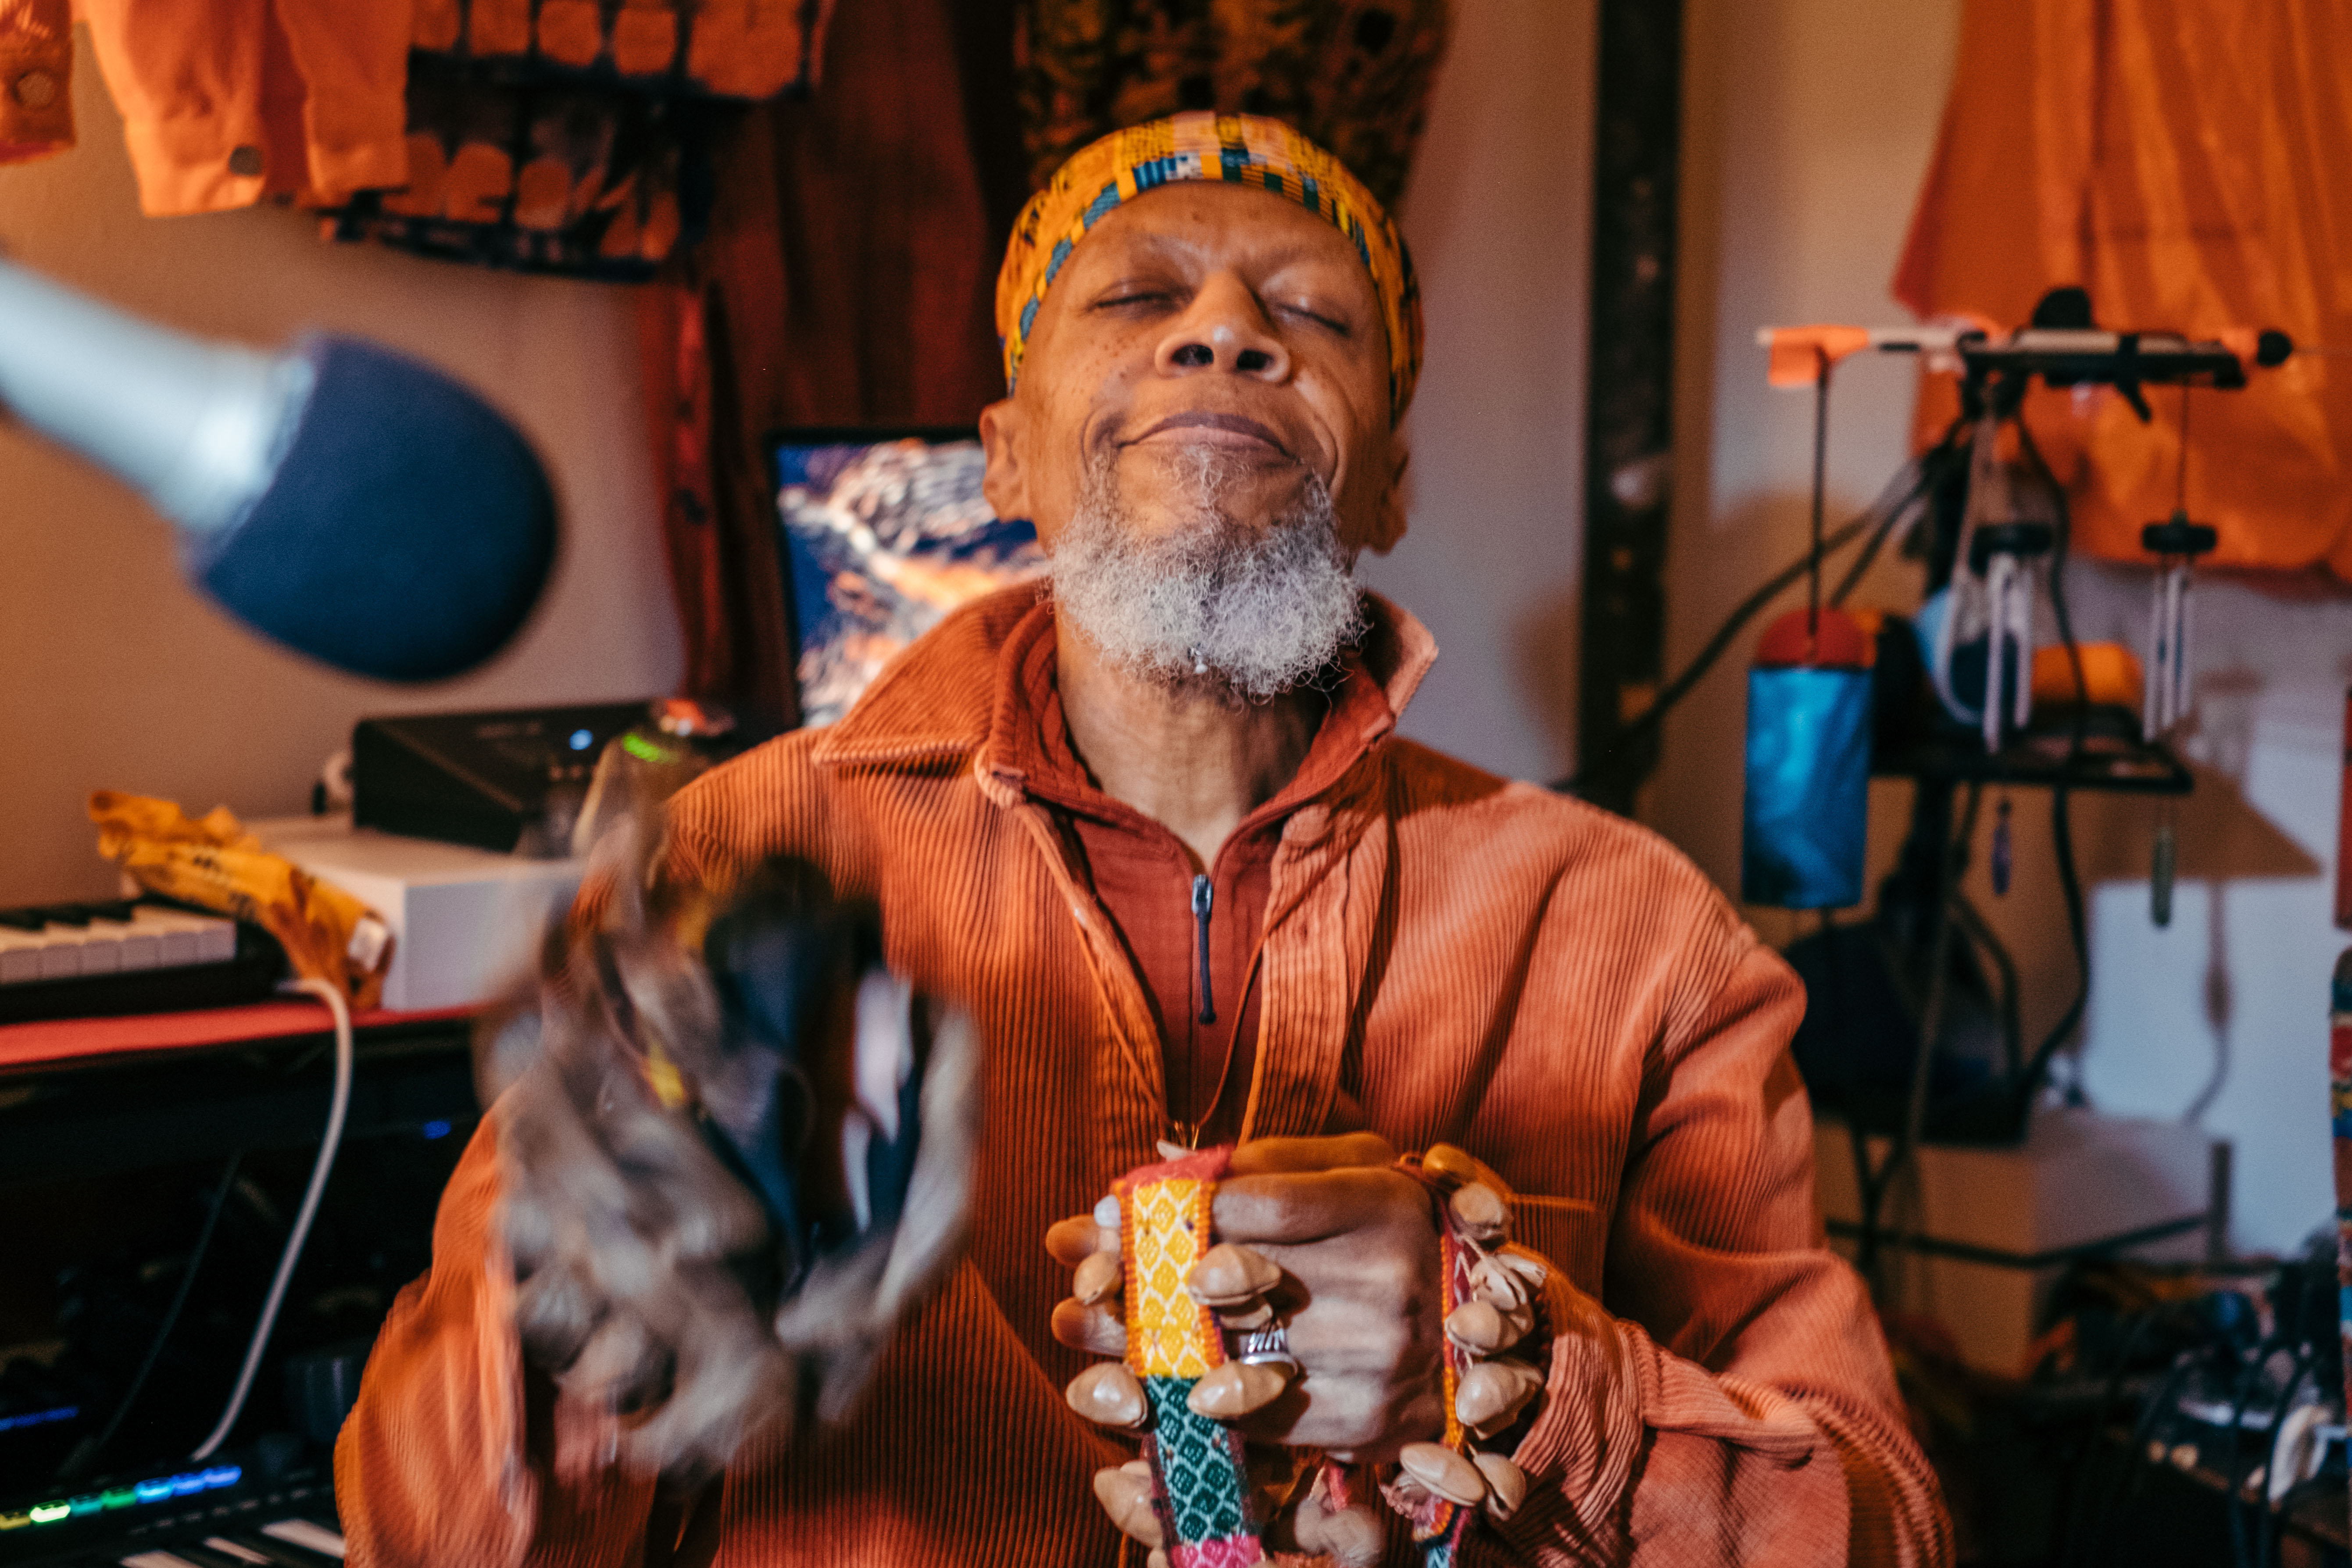 Multi-instrumentalist Edward Larry Gordon, known by his stage name Laraaji, plays Peruvian cacho seed pods